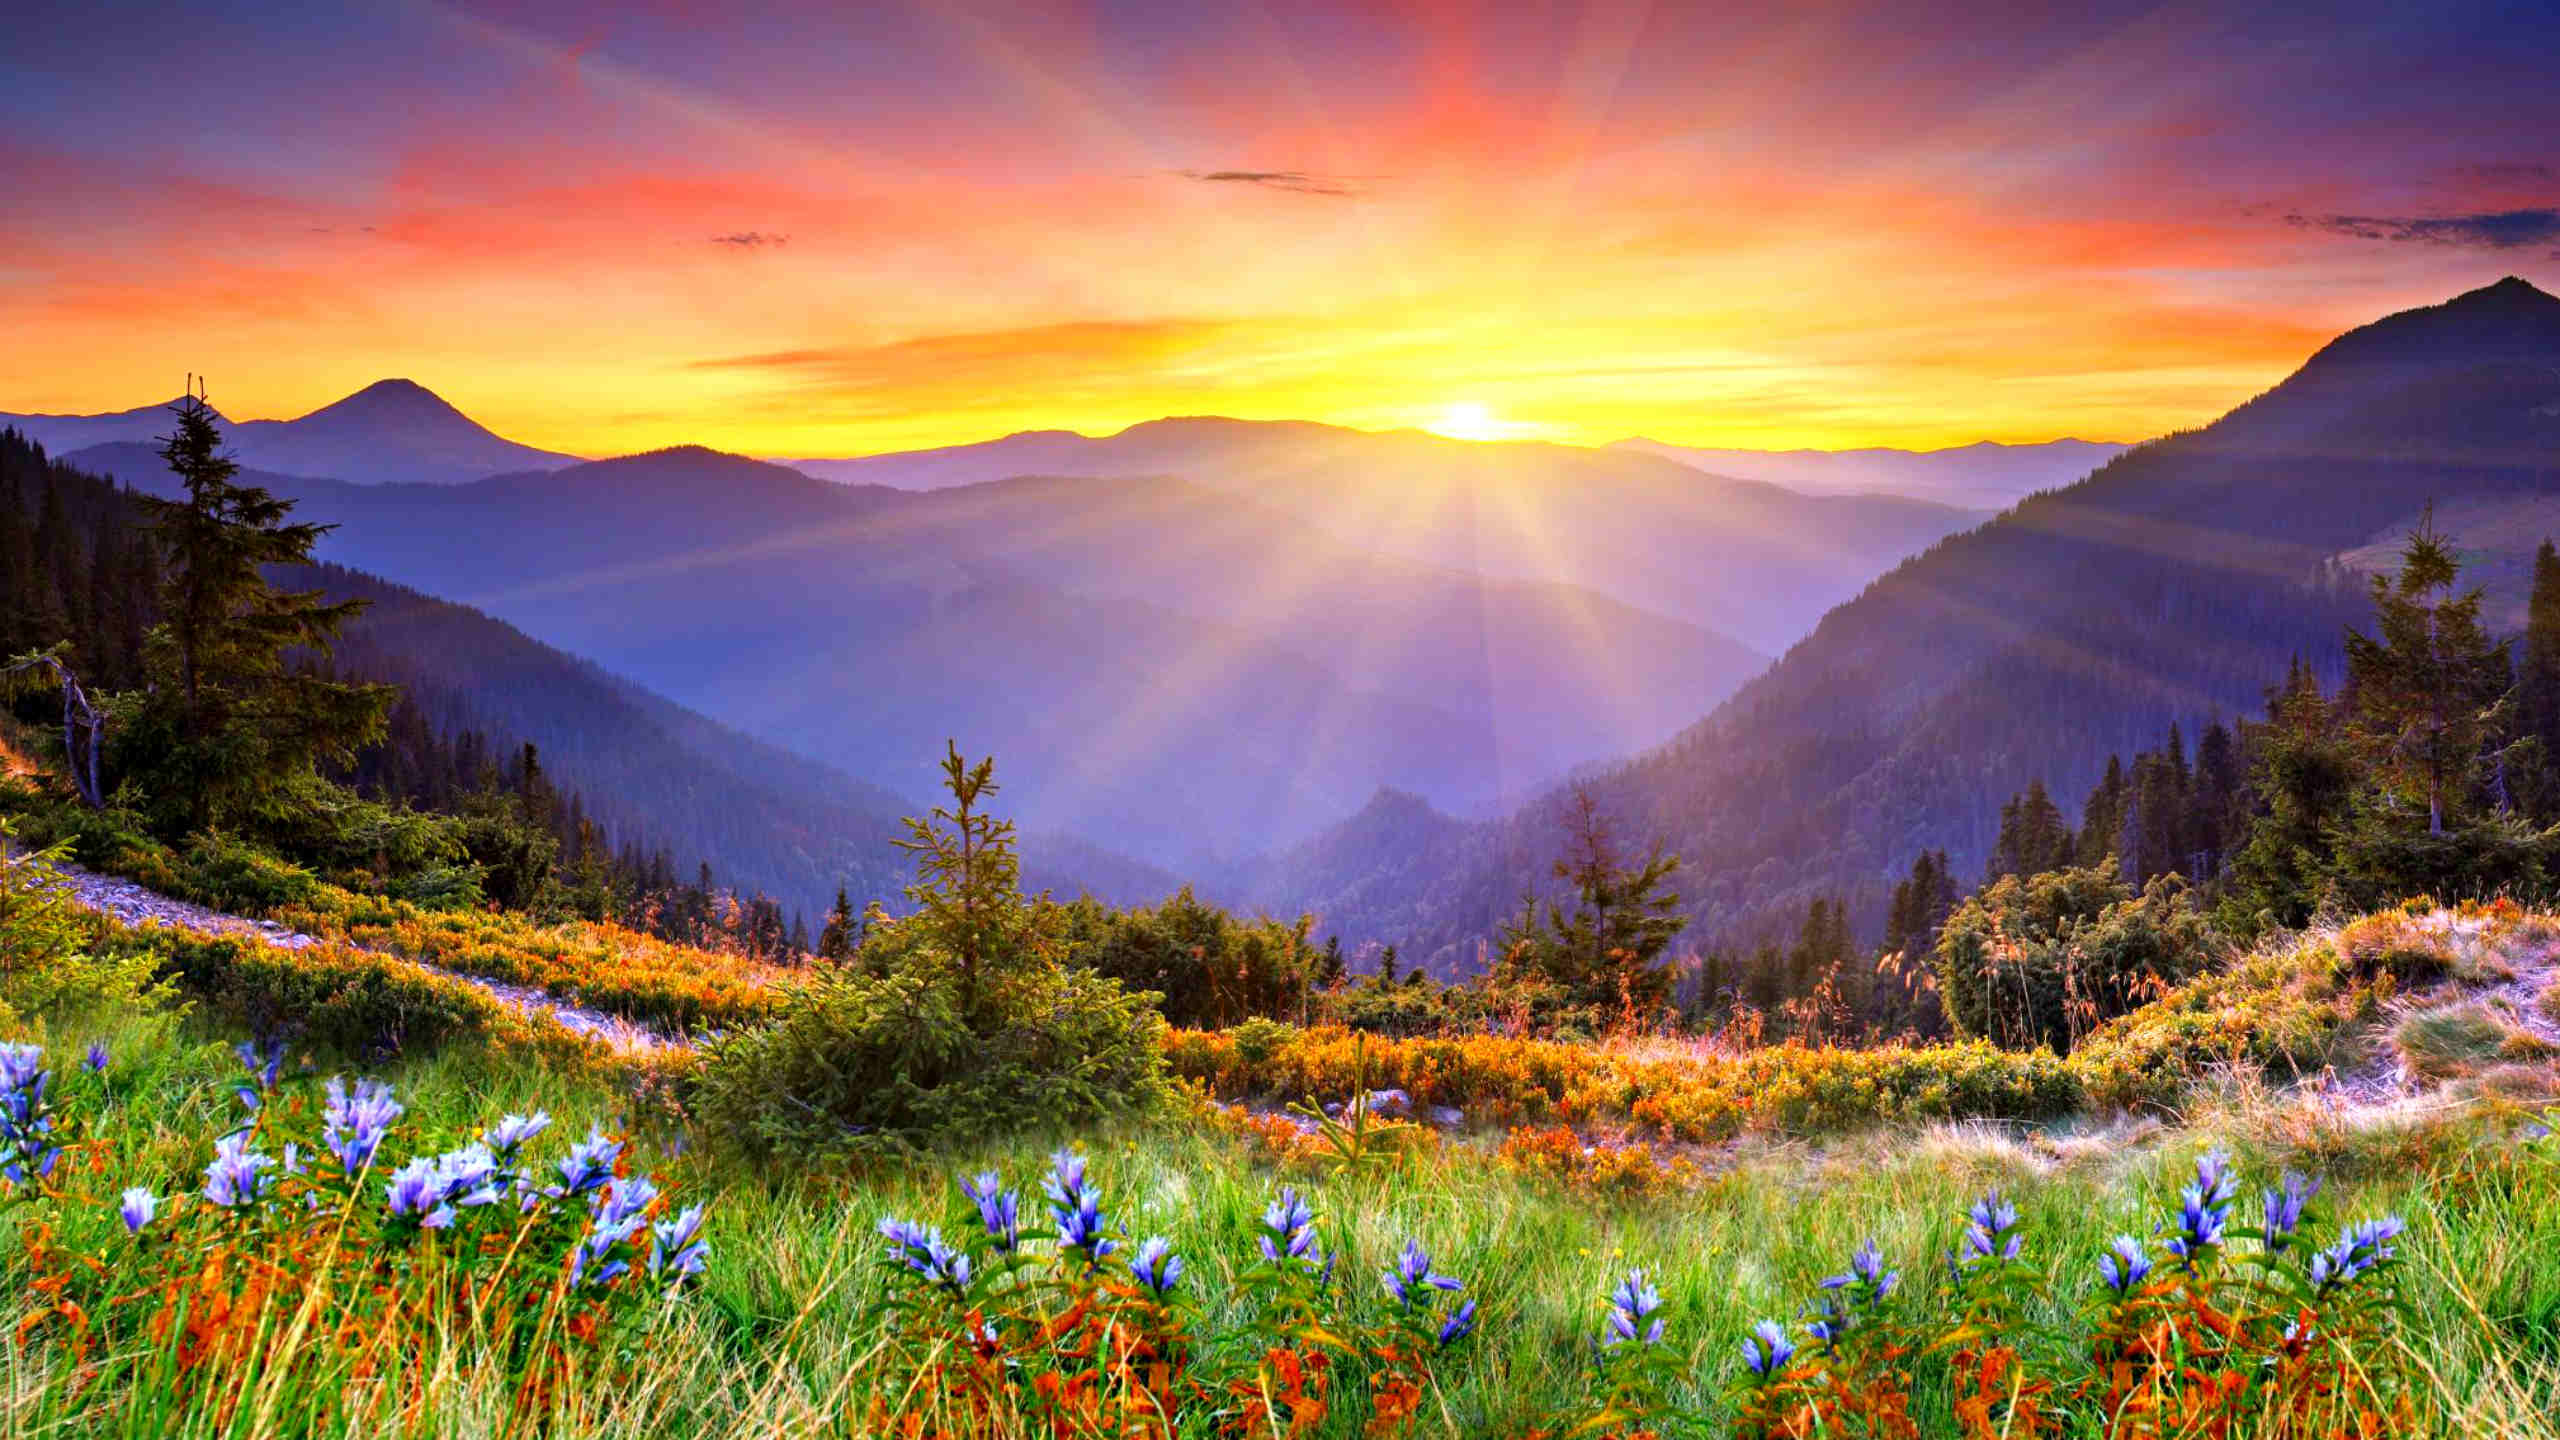 Awesome Sunset Sun Rays Forested Mountains, Beautiful Mountain Flowers